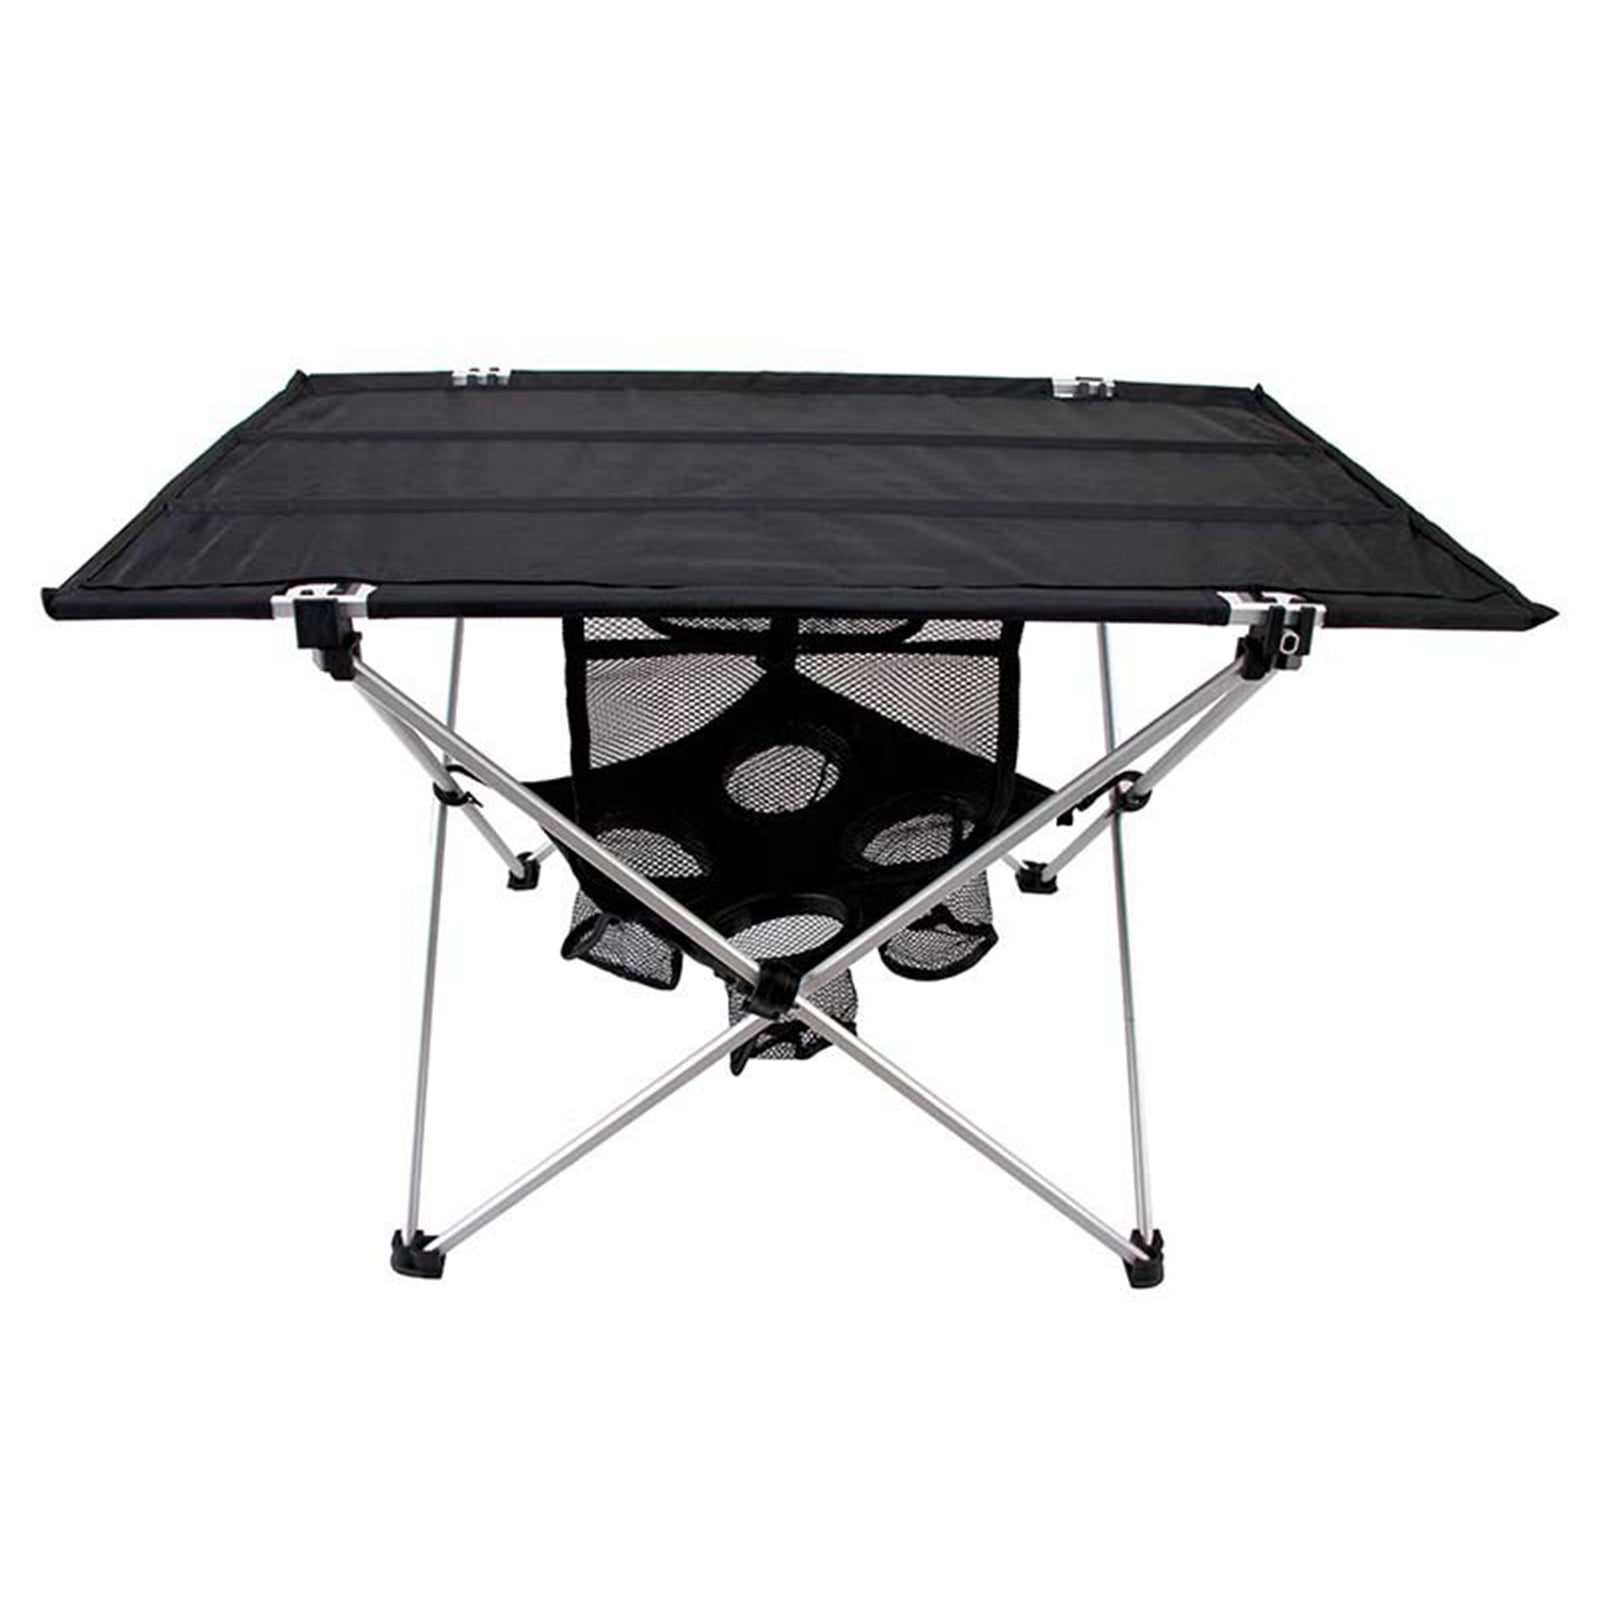 Details about   Portable Folding Table Outdoor Camping Barbecue Picnic Ultra Light Table 